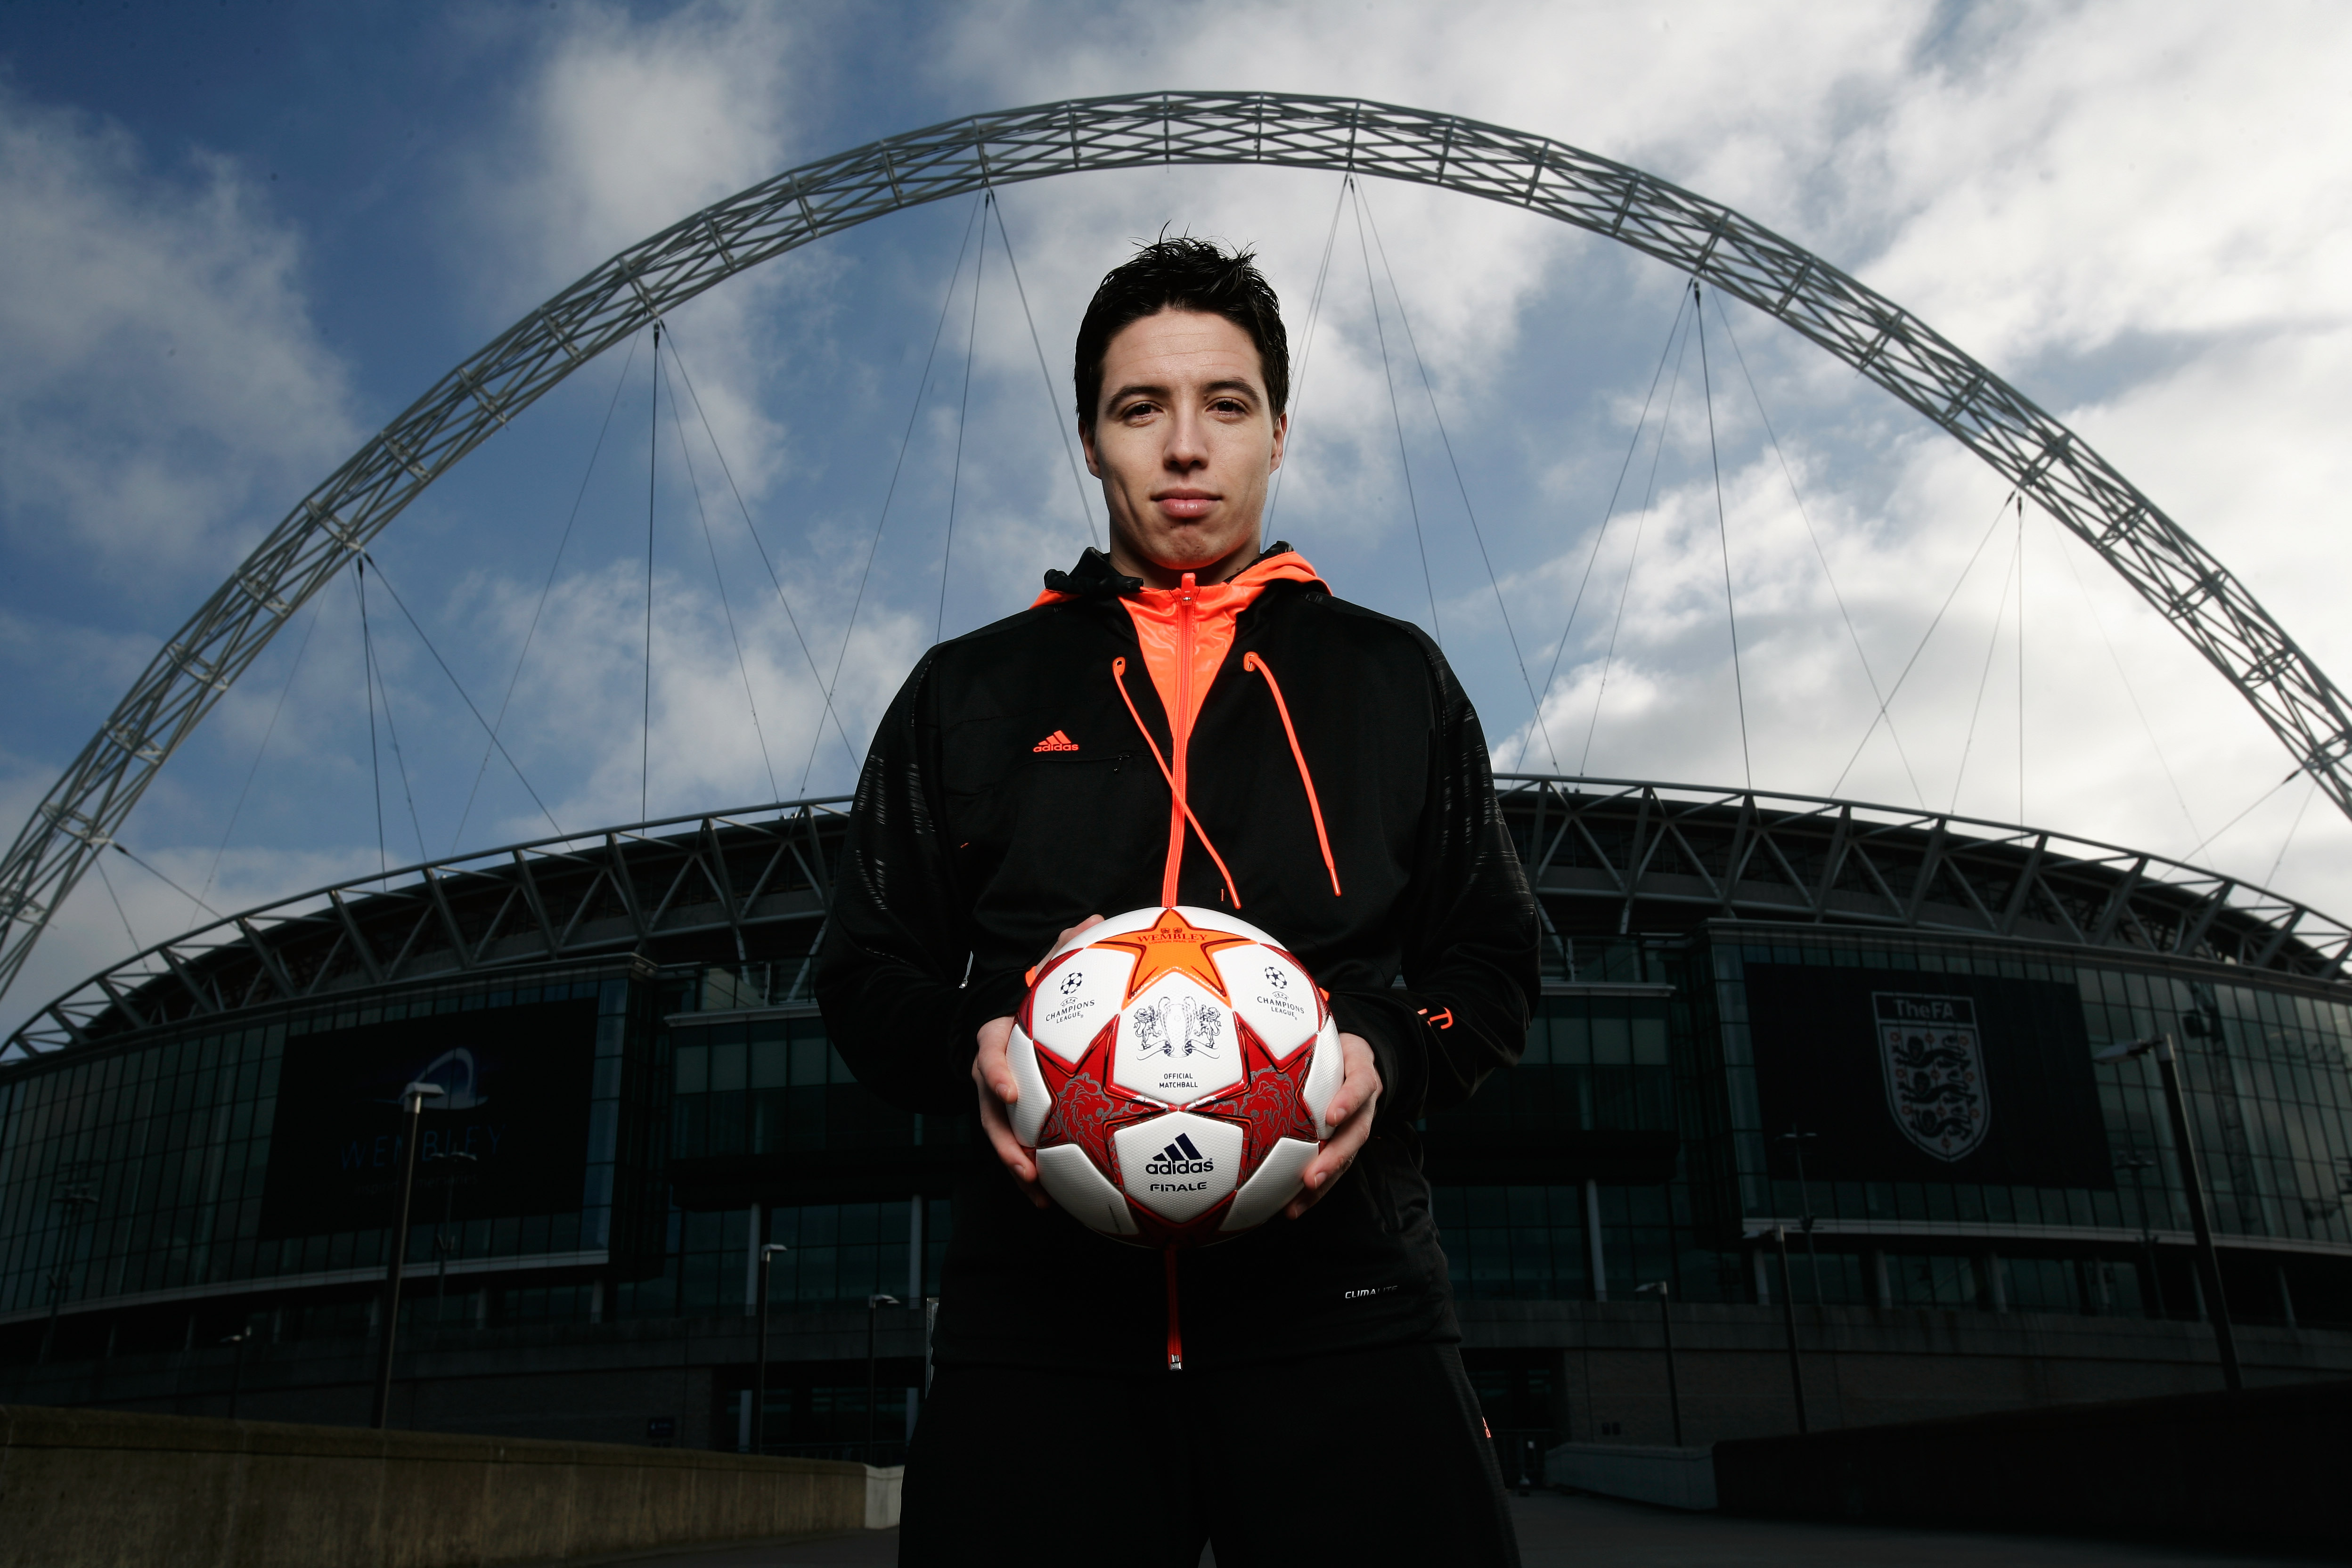 LONDON, ENGLAND - MARCH 03:  Samir Nasri of Arsenal is seen under the Wembley arch as adidas present the Official Match Ball for the 2011 UEFA Champions League Final at Wembley Stadium on March 3, 2011 in London, United Kingdom.  (Photo by Gary Prior/Gett